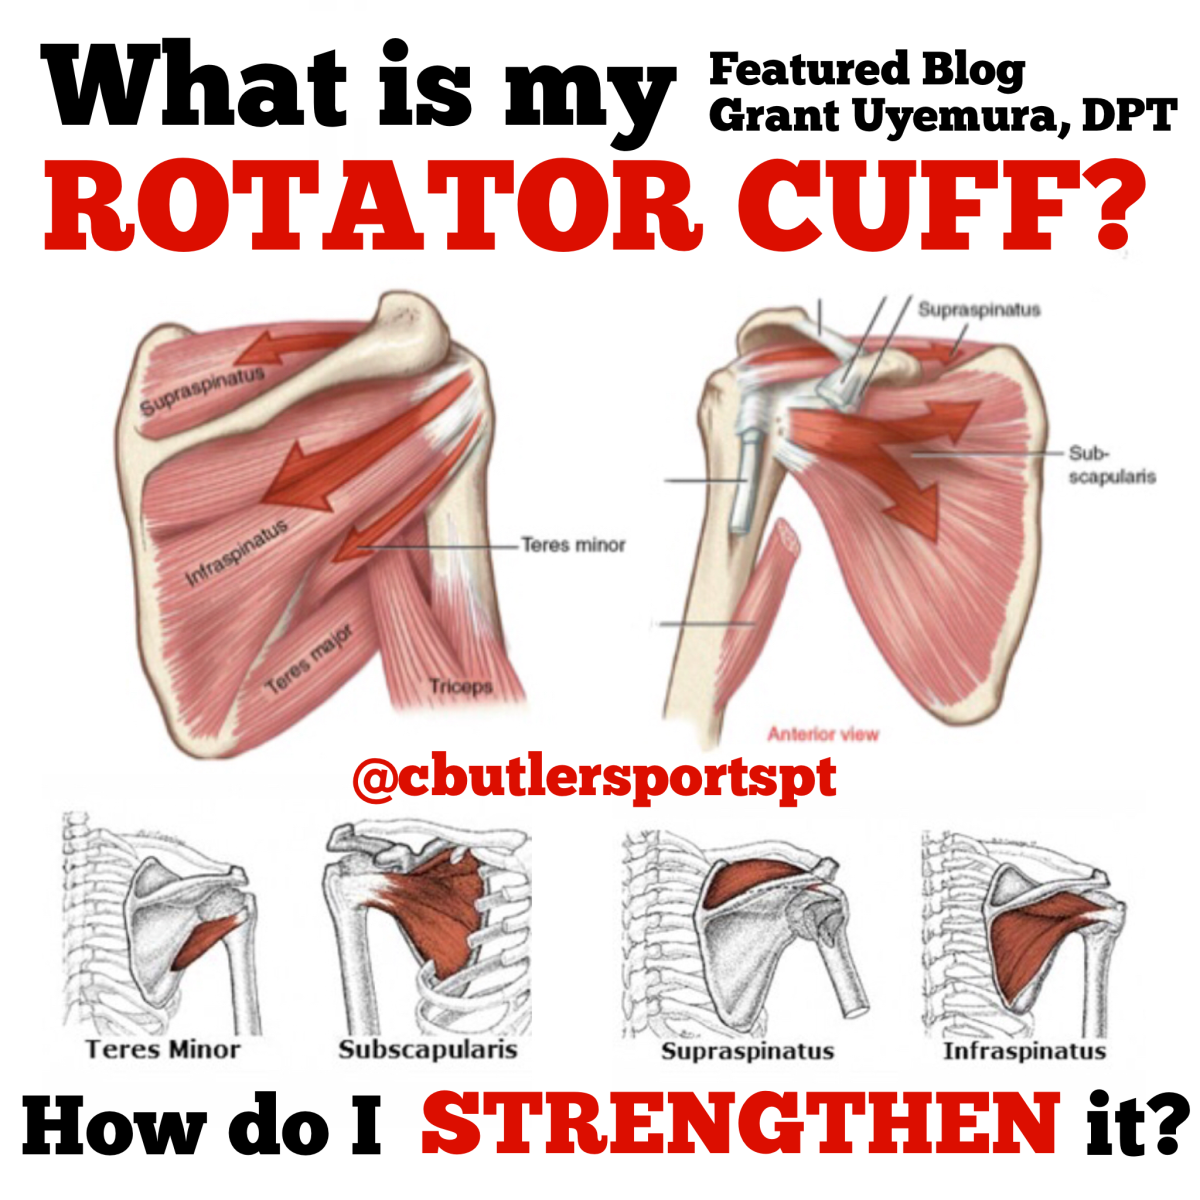 Why is the Rotator Cuff Important?